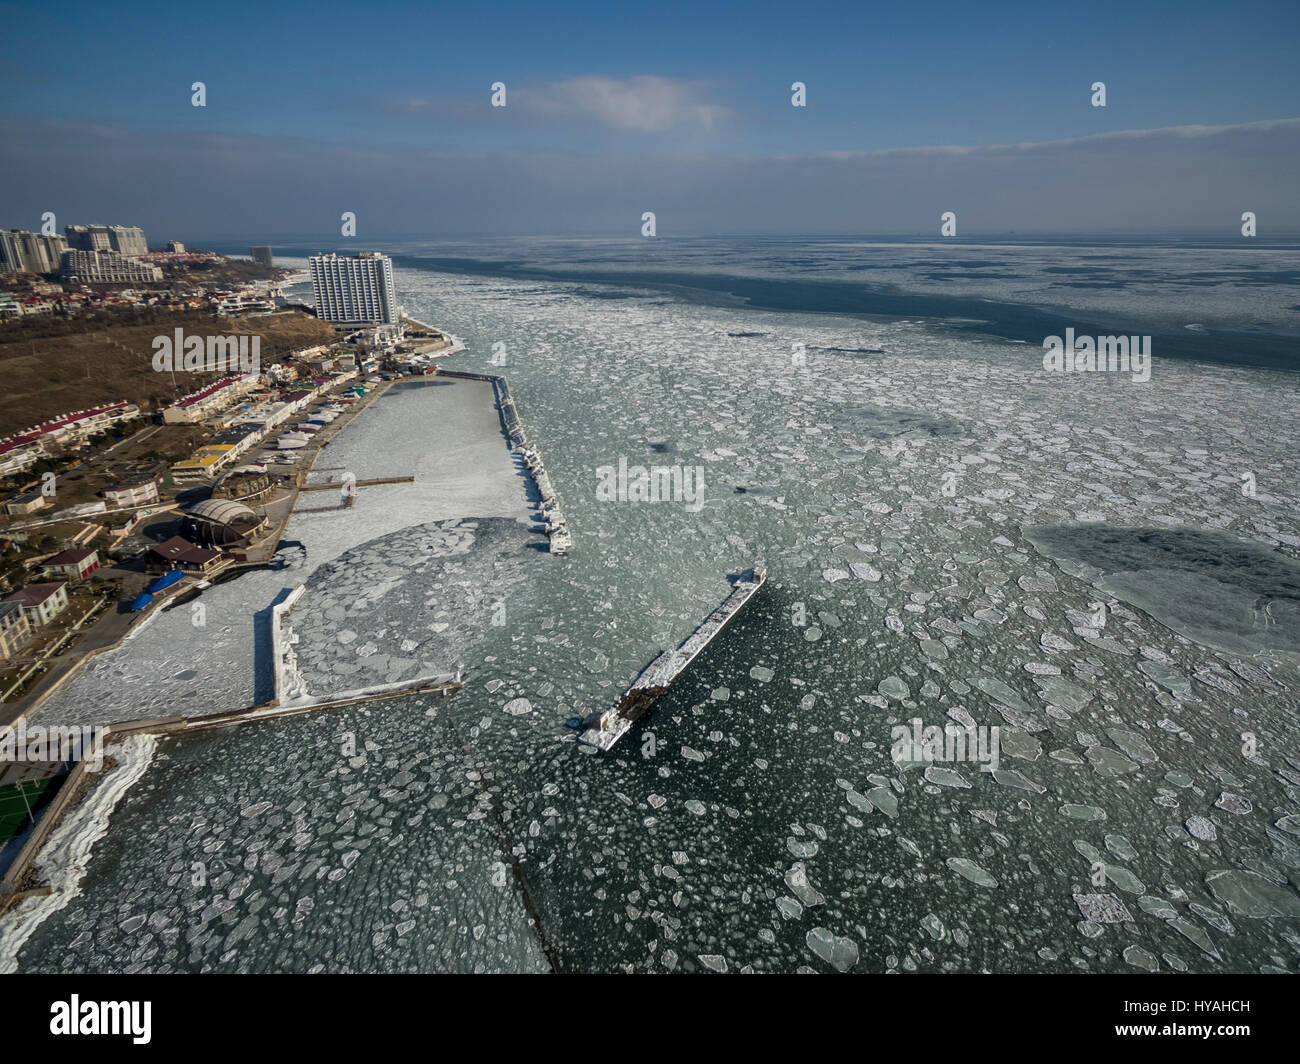 Aerial drone image of the Black Sea frozen at 12 Station Beach in Odessa Ukraine. Stock Photo